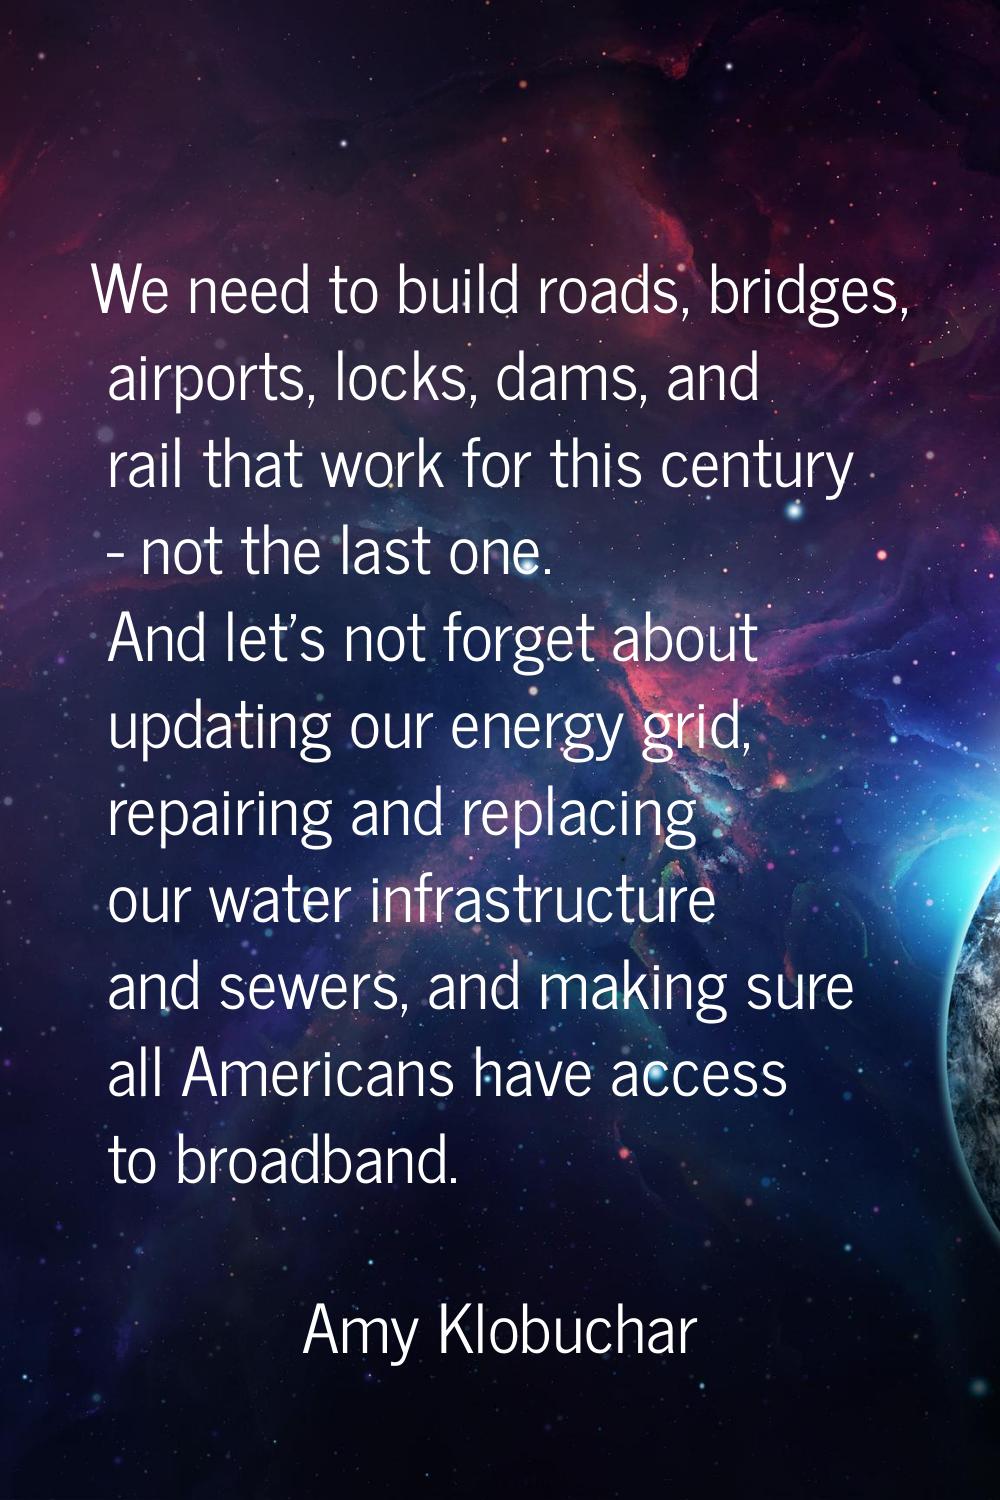 We need to build roads, bridges, airports, locks, dams, and rail that work for this century - not t